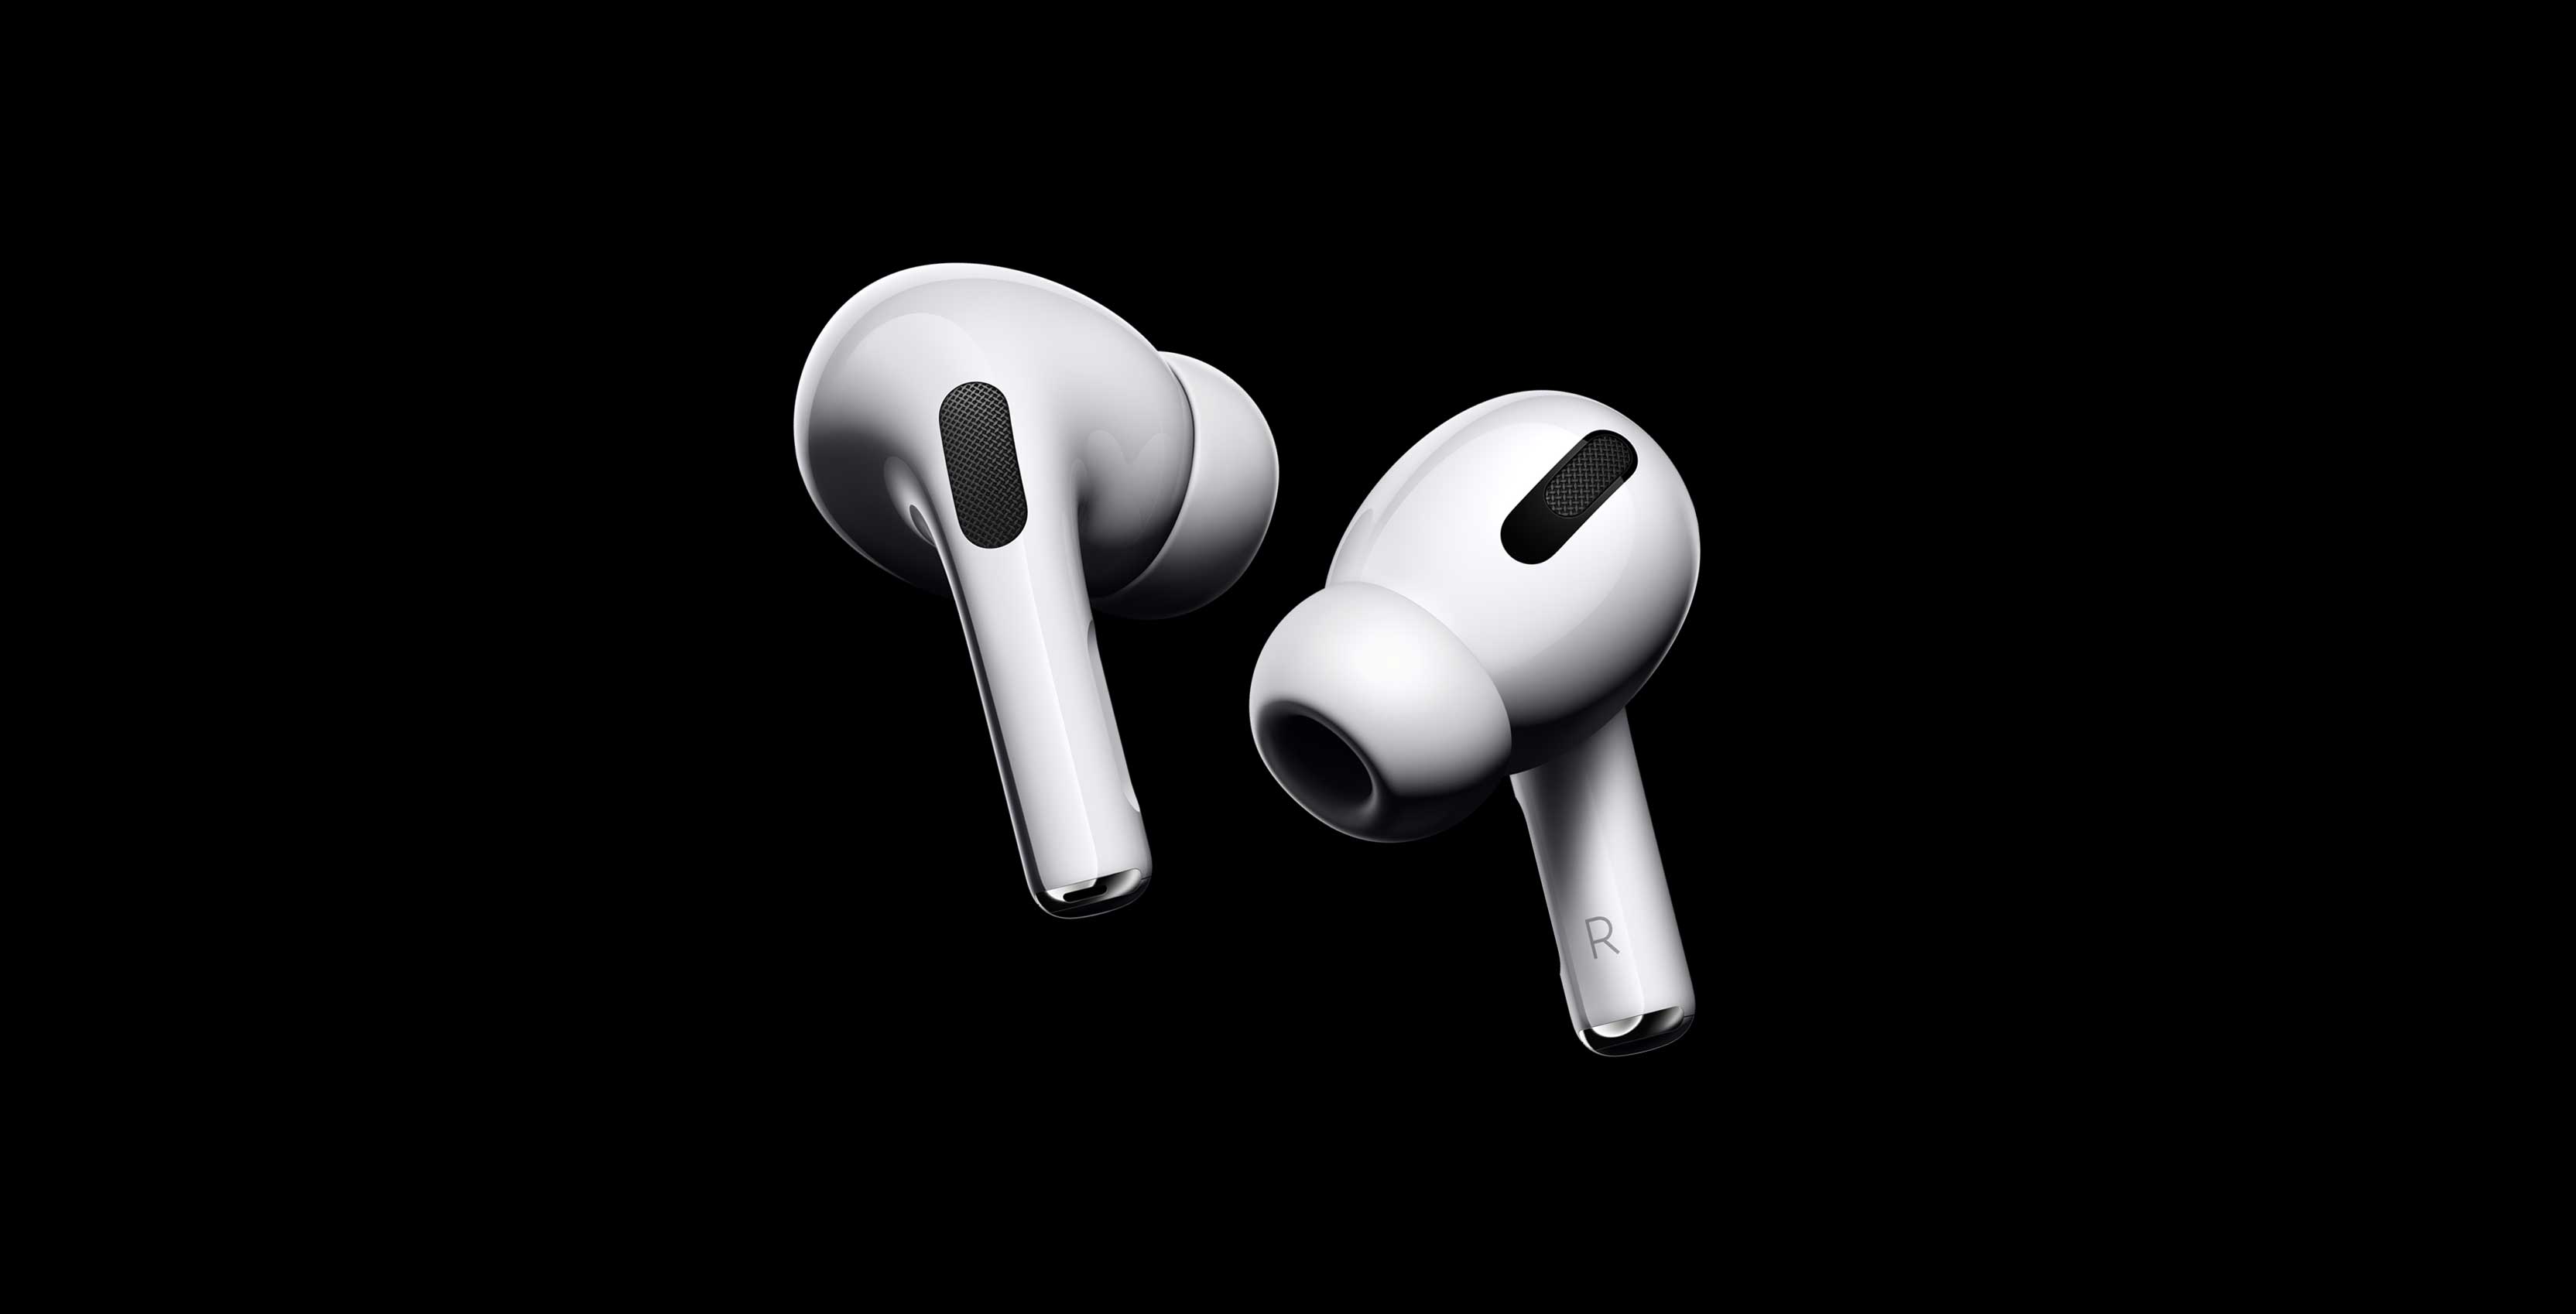 Derfra Bedst besværlige Apple announces $329 AirPods Pro with noise-cancelling, water-resistance